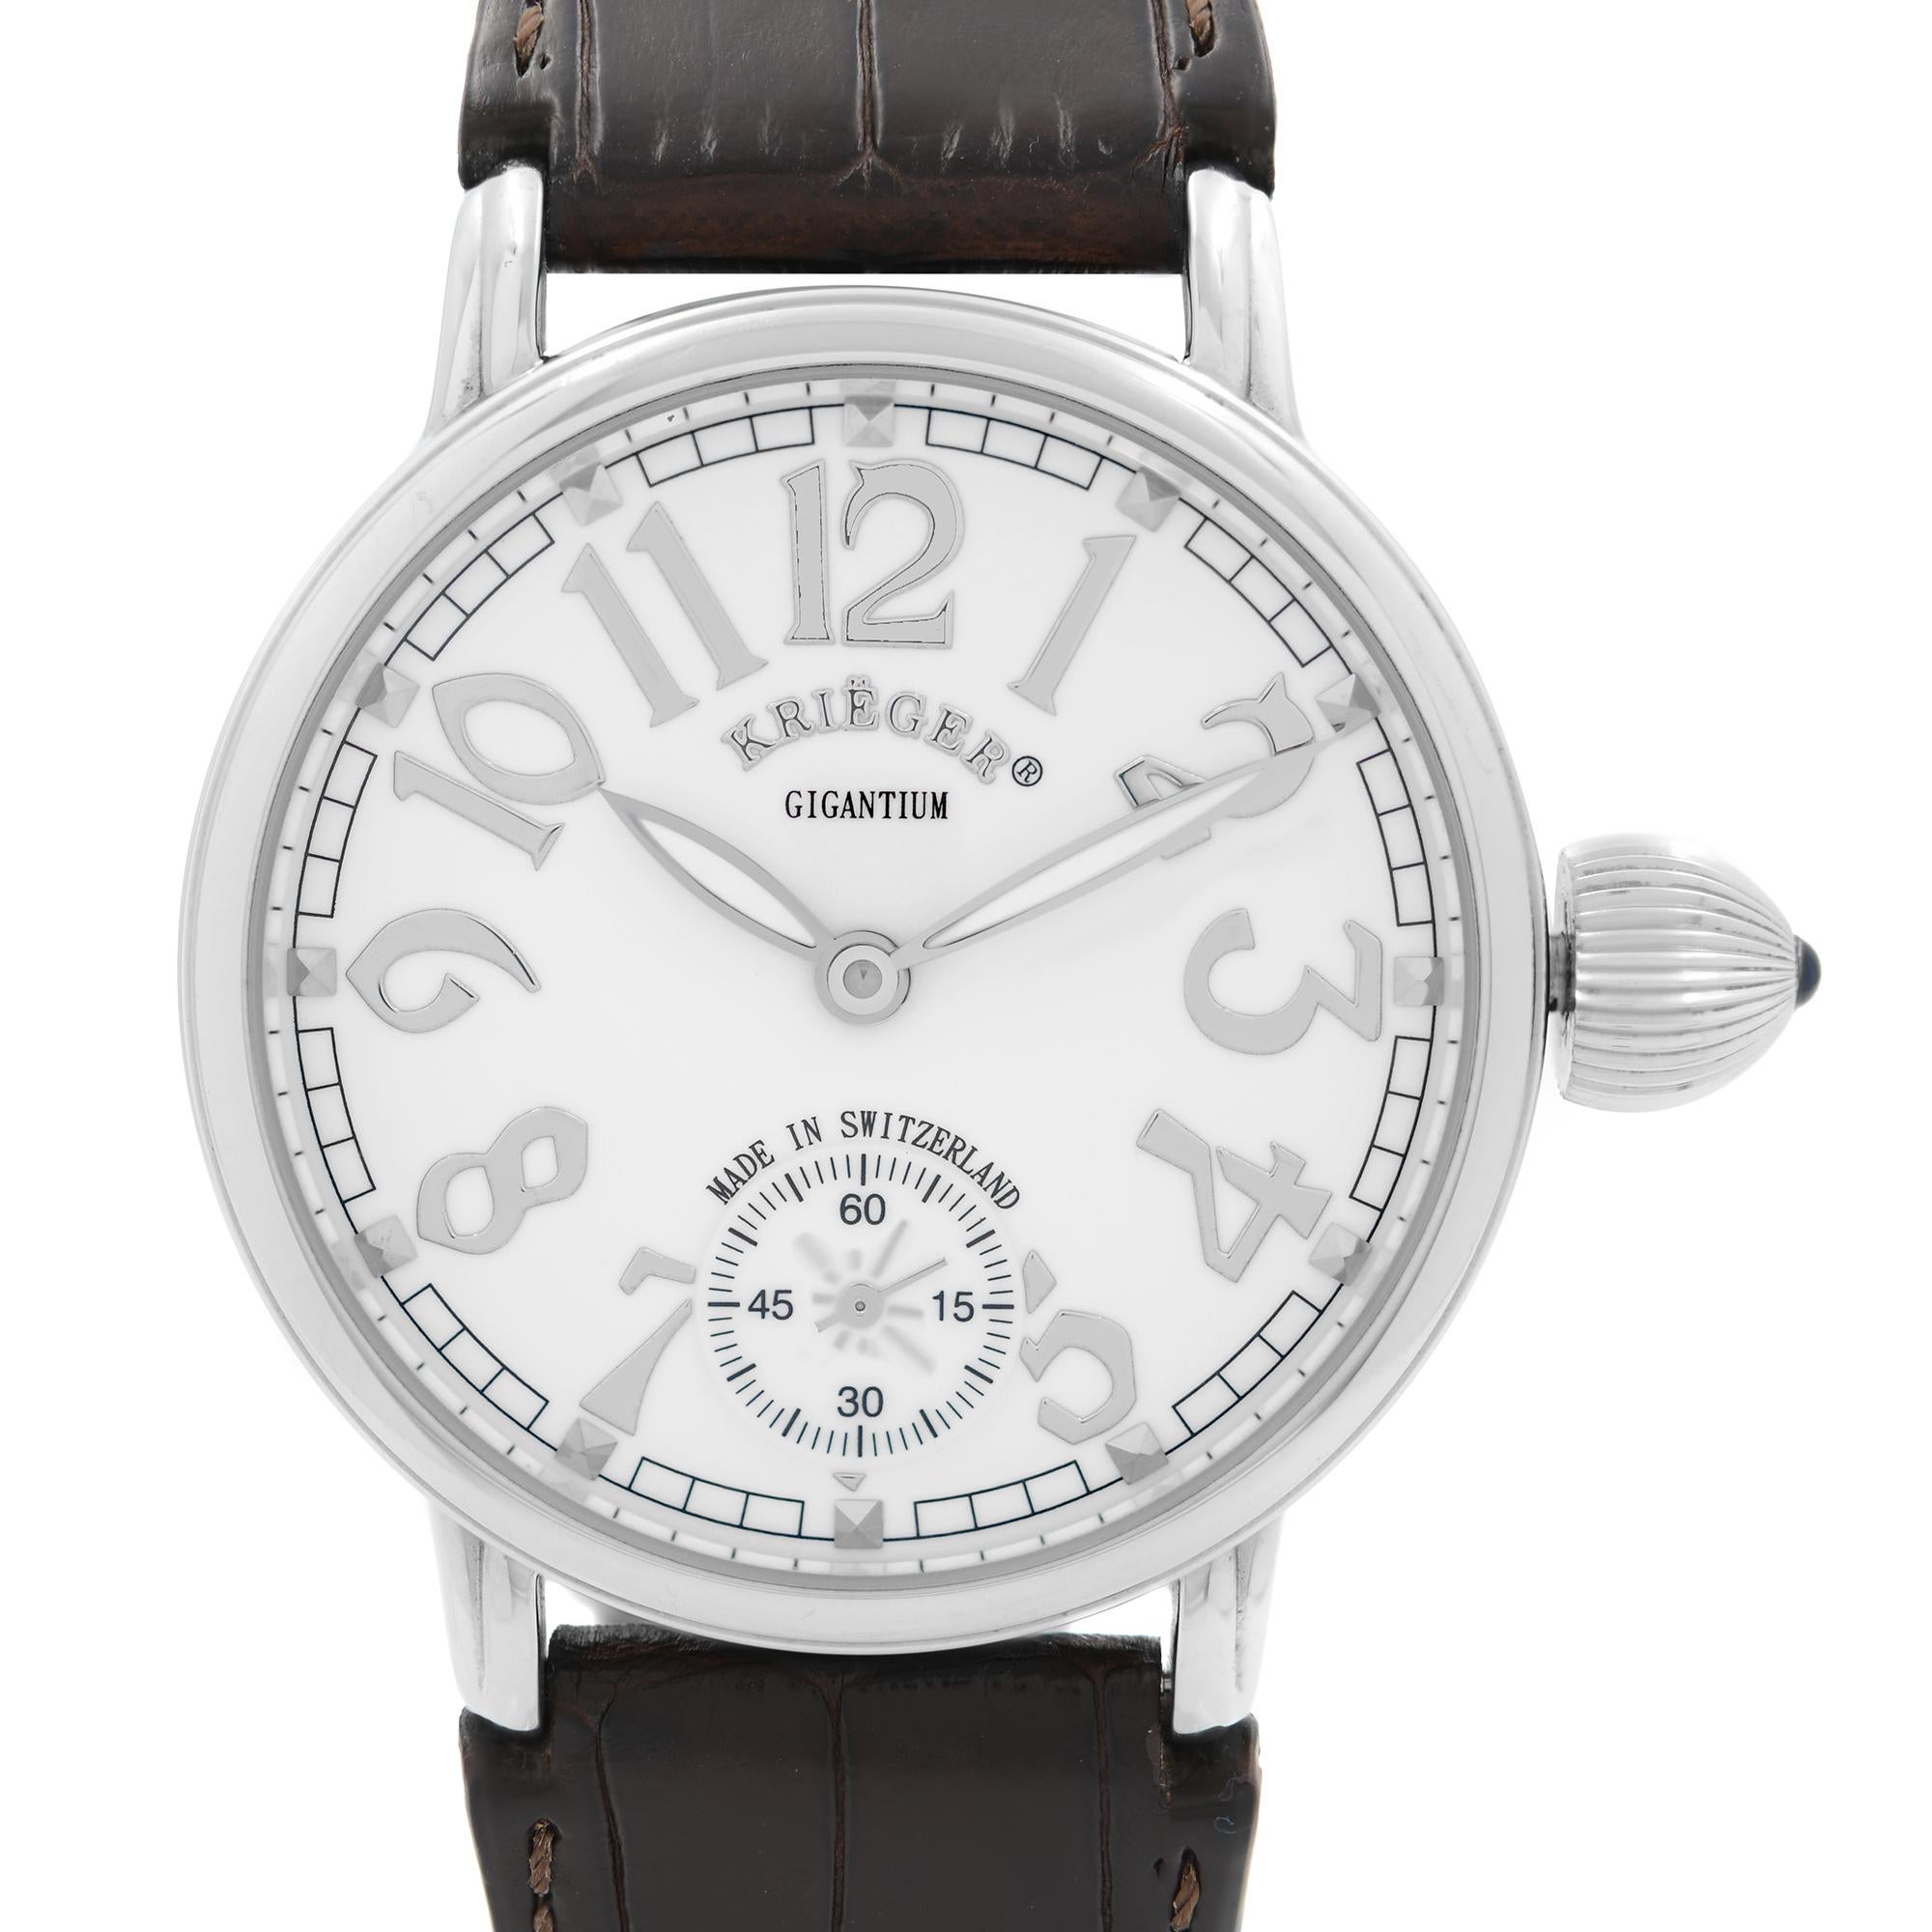 Pre Owned Krieger Gigantium Limited Edition Steel White Dial Hand-Wind Mens Watch K7007. Limited Edition Number 563/1000. This Beautiful Timepiece Features: Stainless Steel Case with a Brown Leather Strap, Fixed Stainless Steel Bezel, White Dial